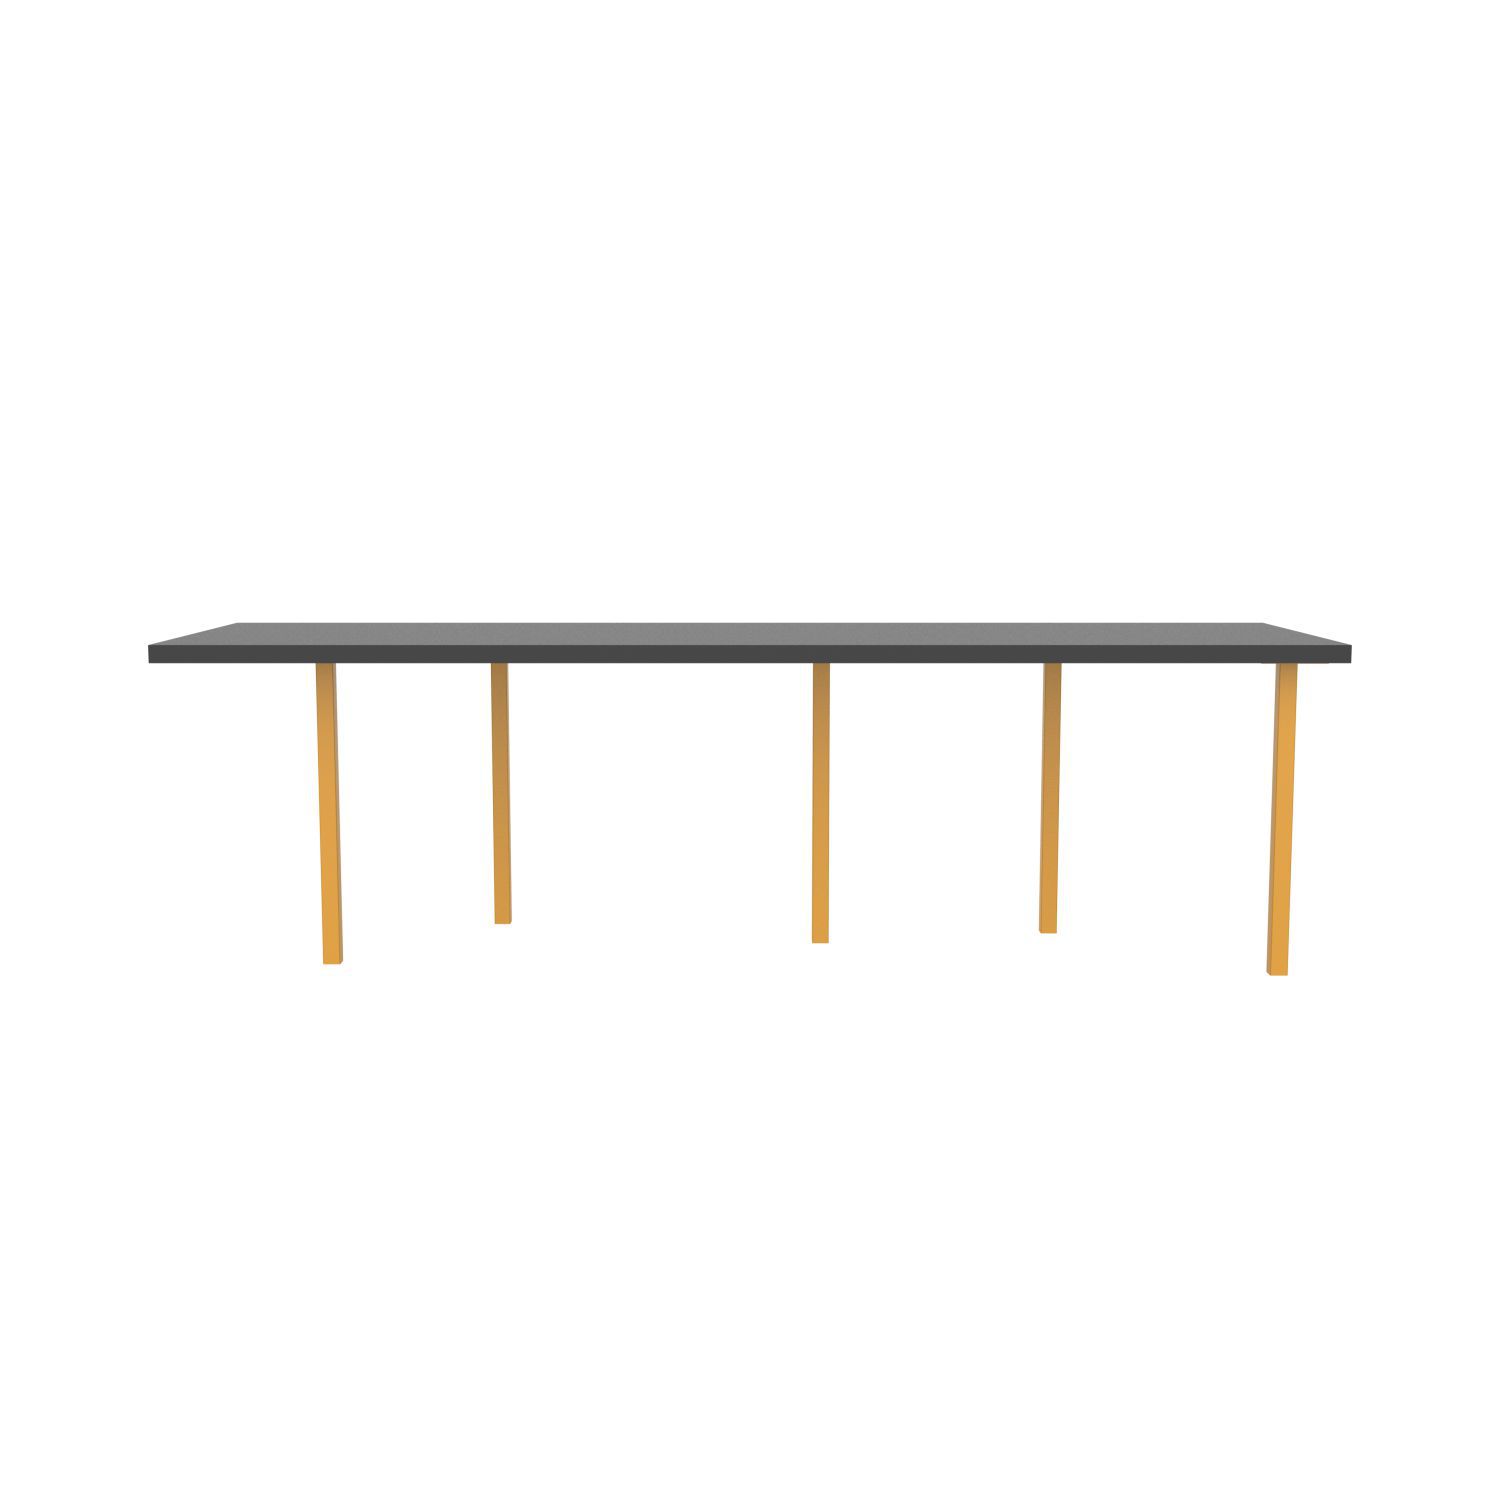 lensvelt bbrand table five fixed heigt 80x264 hpl black 50 mm price level 1 yellow ral1004